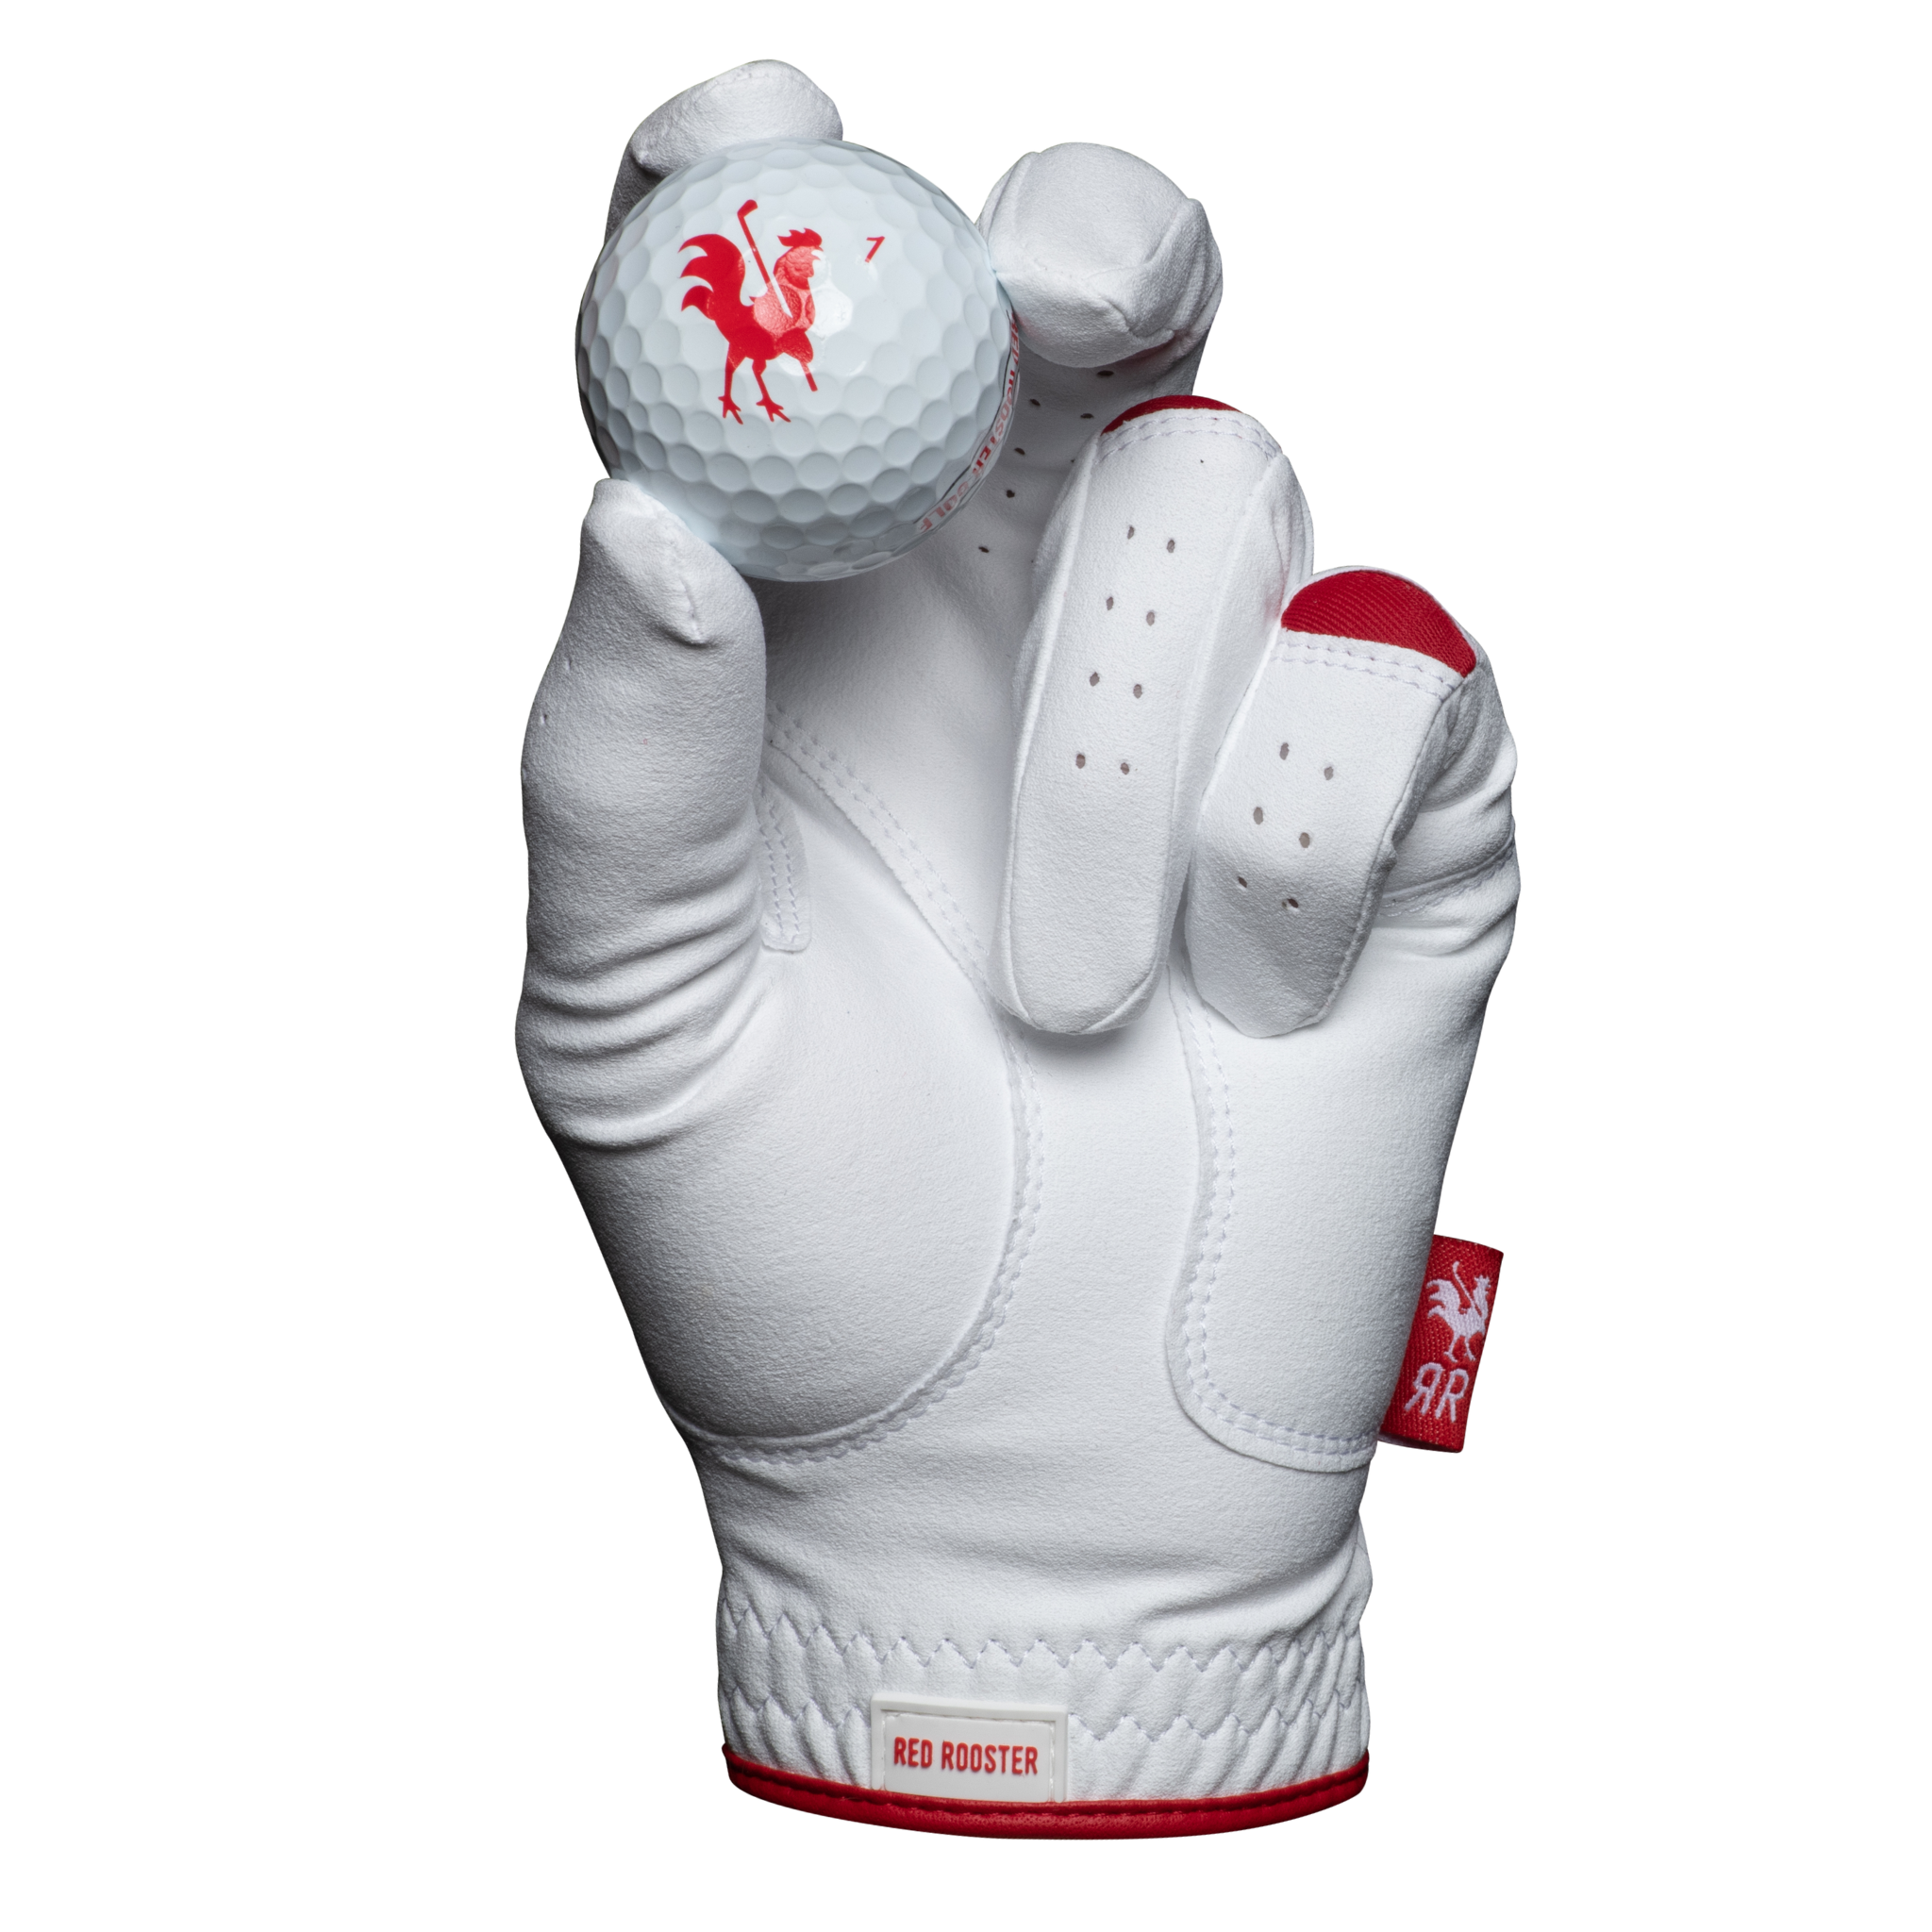 The Range Rooster golf glove  holding golf ball view